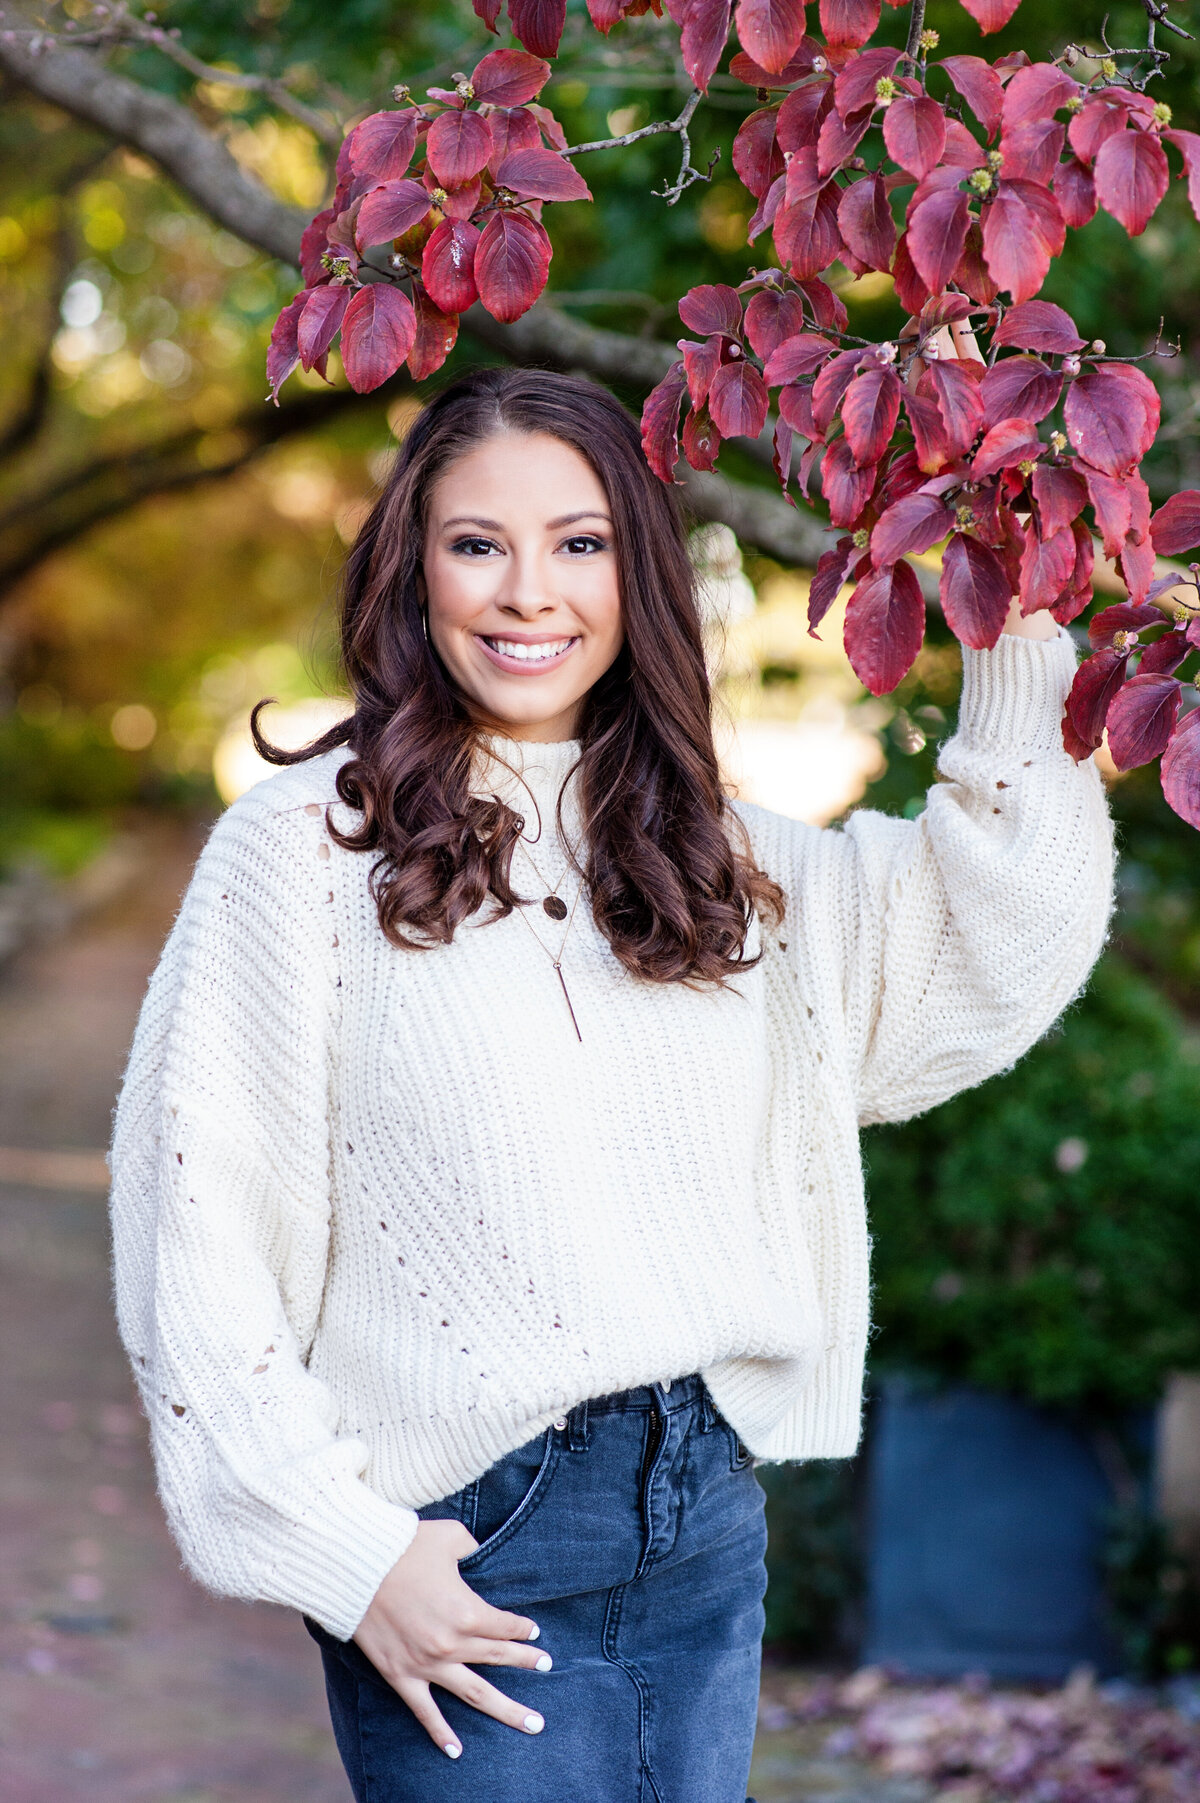 Mechanicsville high school senior girl poses during fall with red leaves. She is wearing a denim skirt and beige sweater in Libby Hill Park.